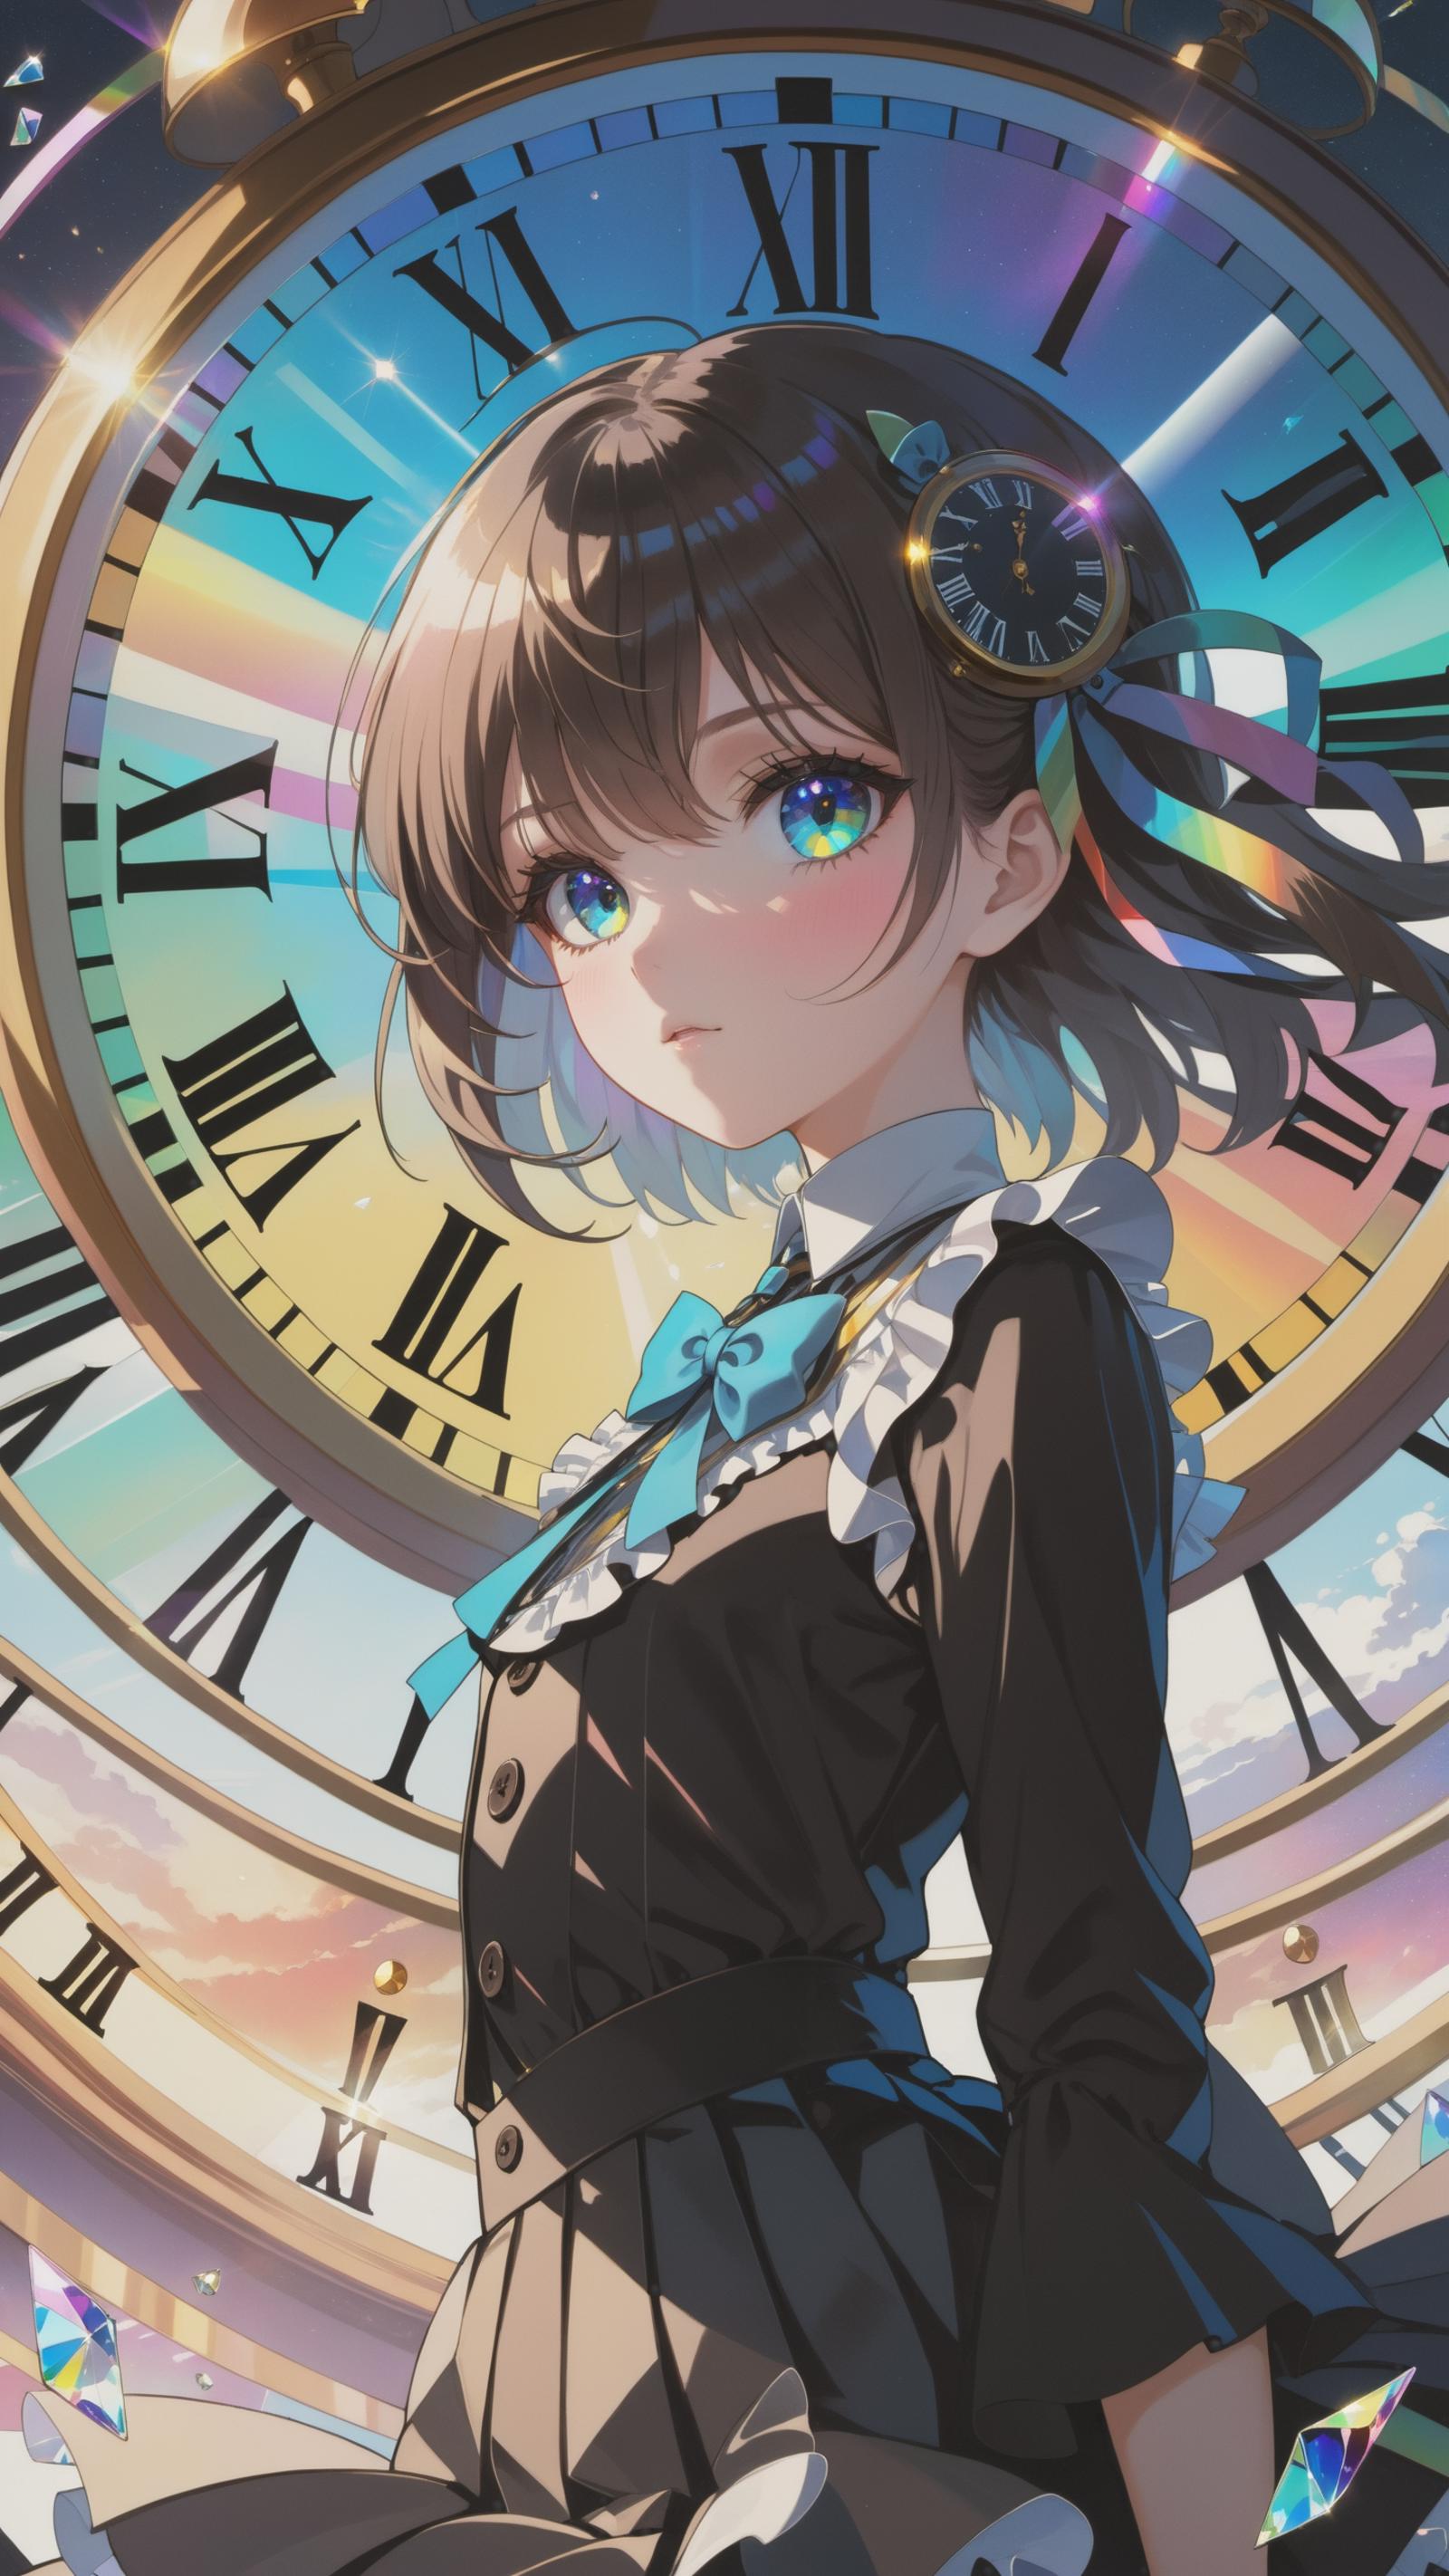 A young girl with a blue bow in her hair is standing in front of a clock.